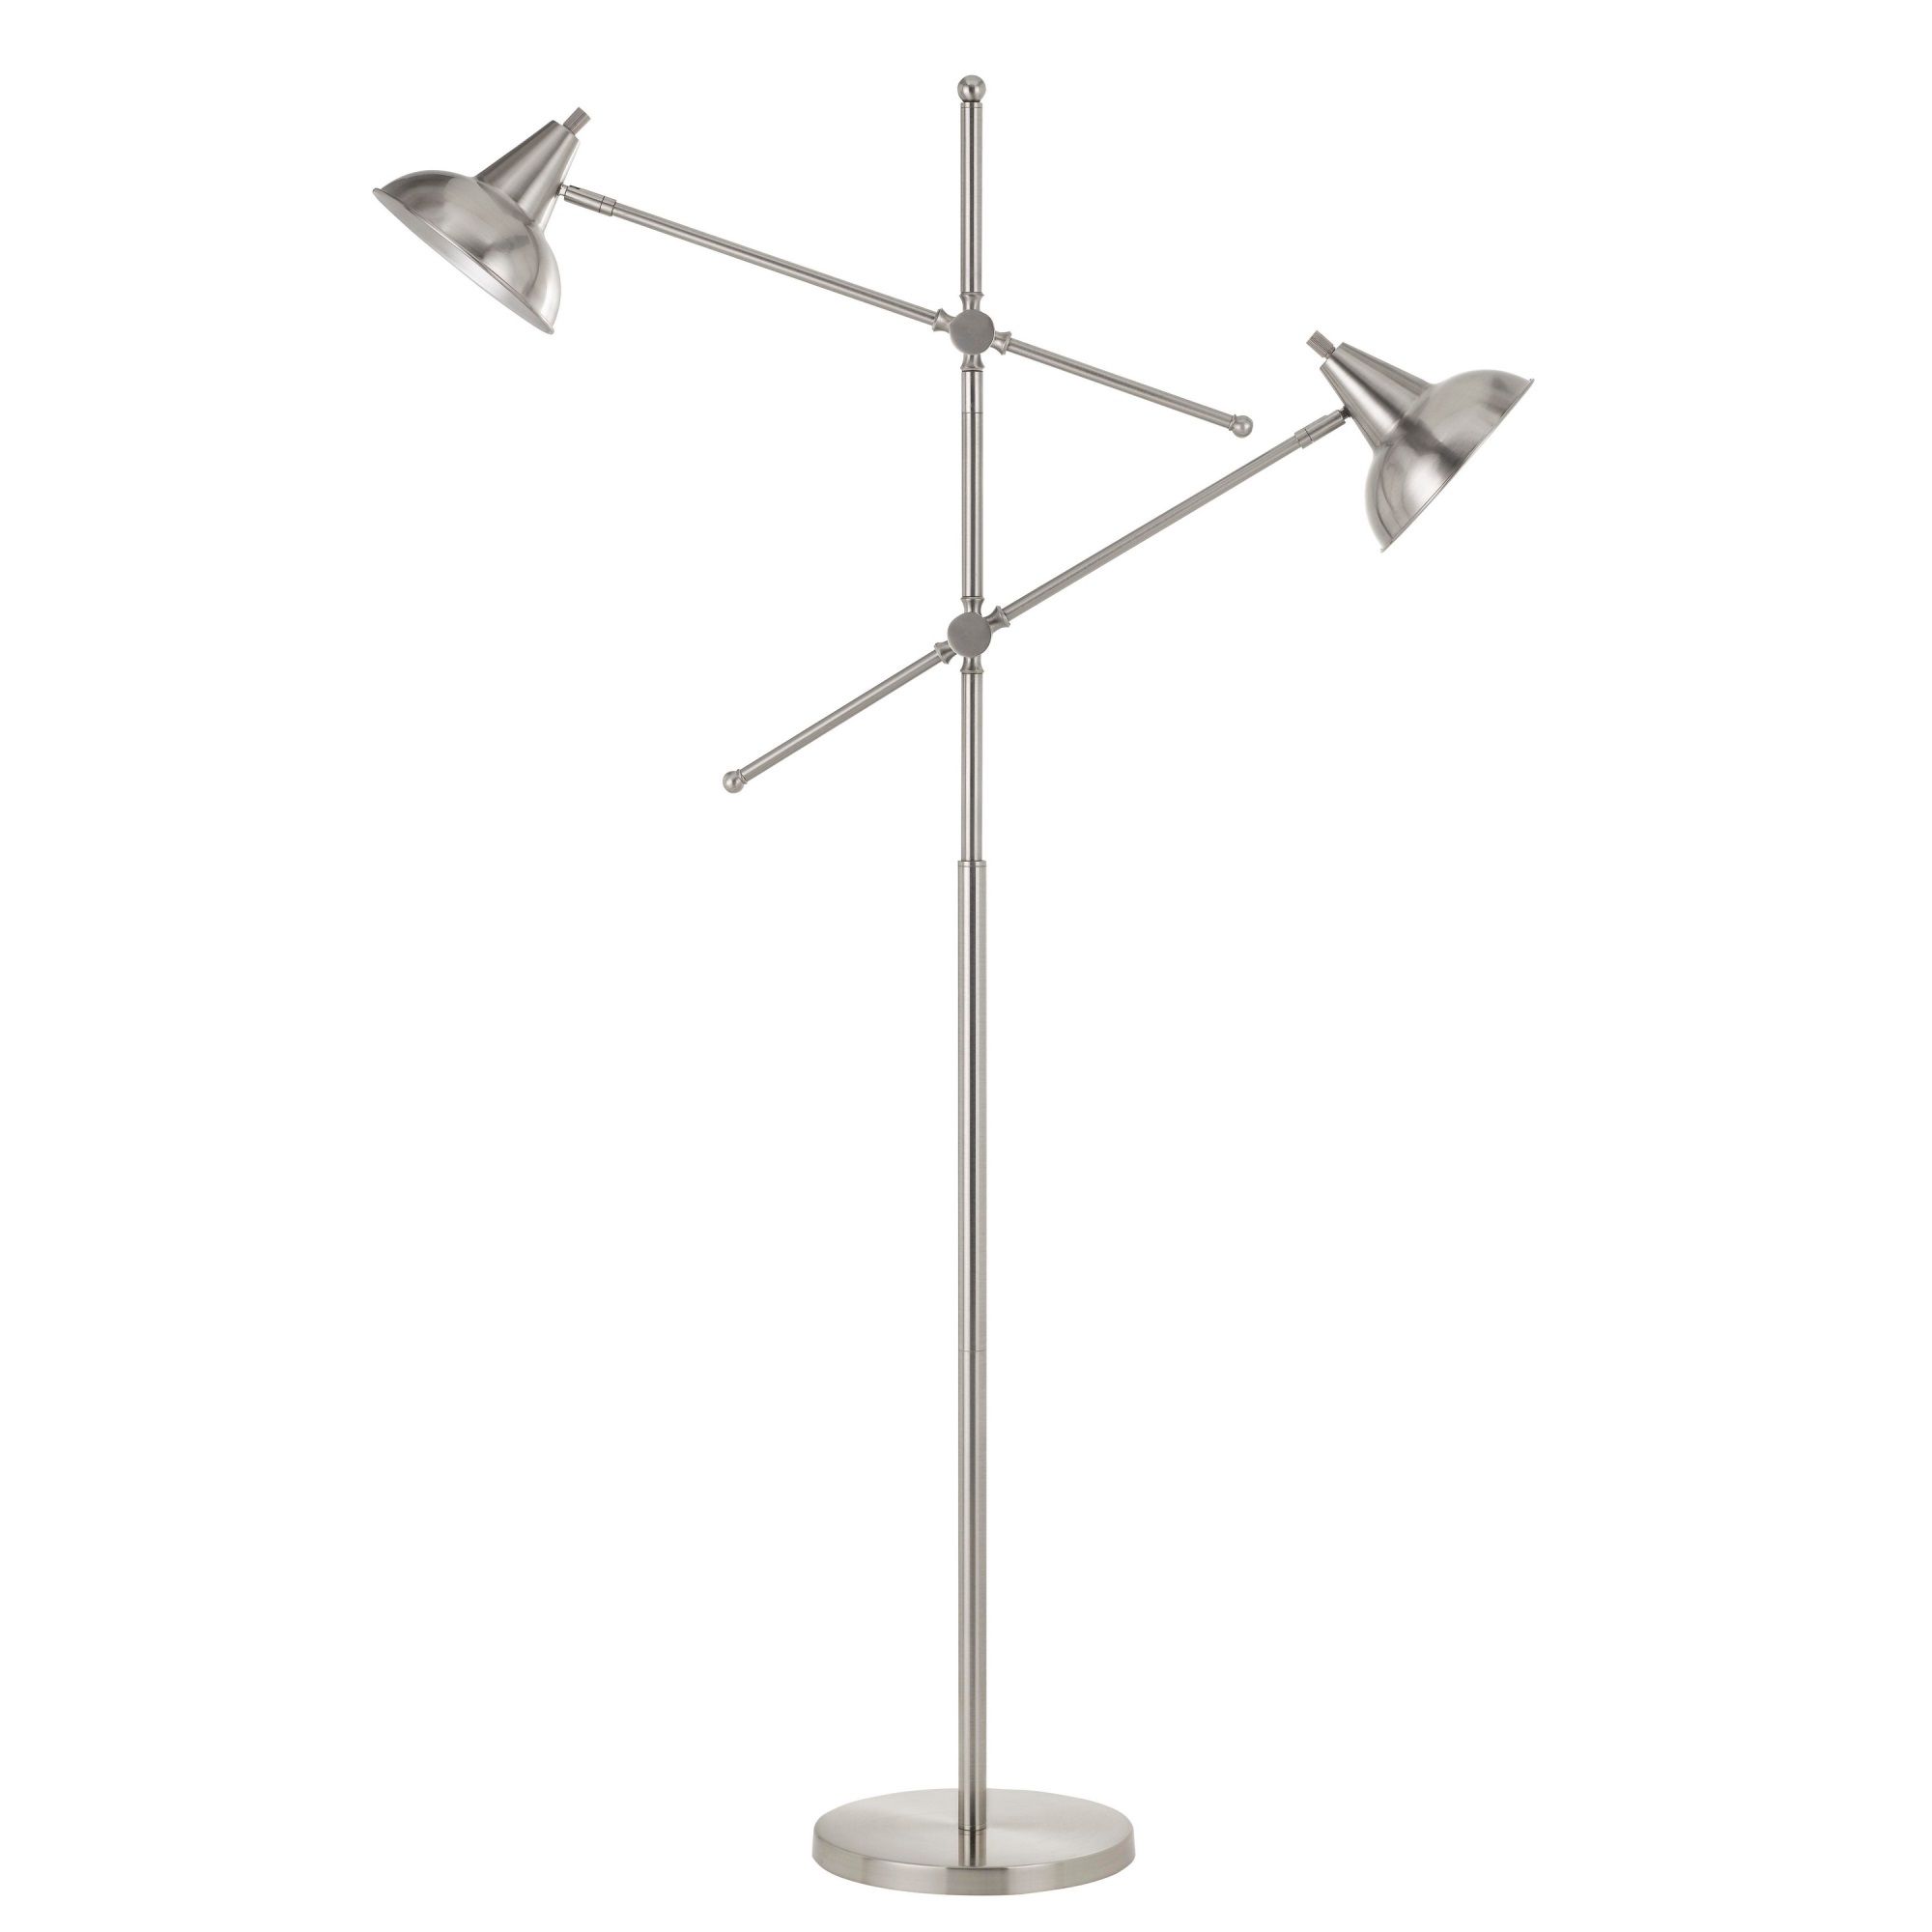 Tubular Metal Body Floor Lamp With 2 Adjustable Arms, Silver – Walmart For 2 Arm Floor Lamps (View 13 of 20)